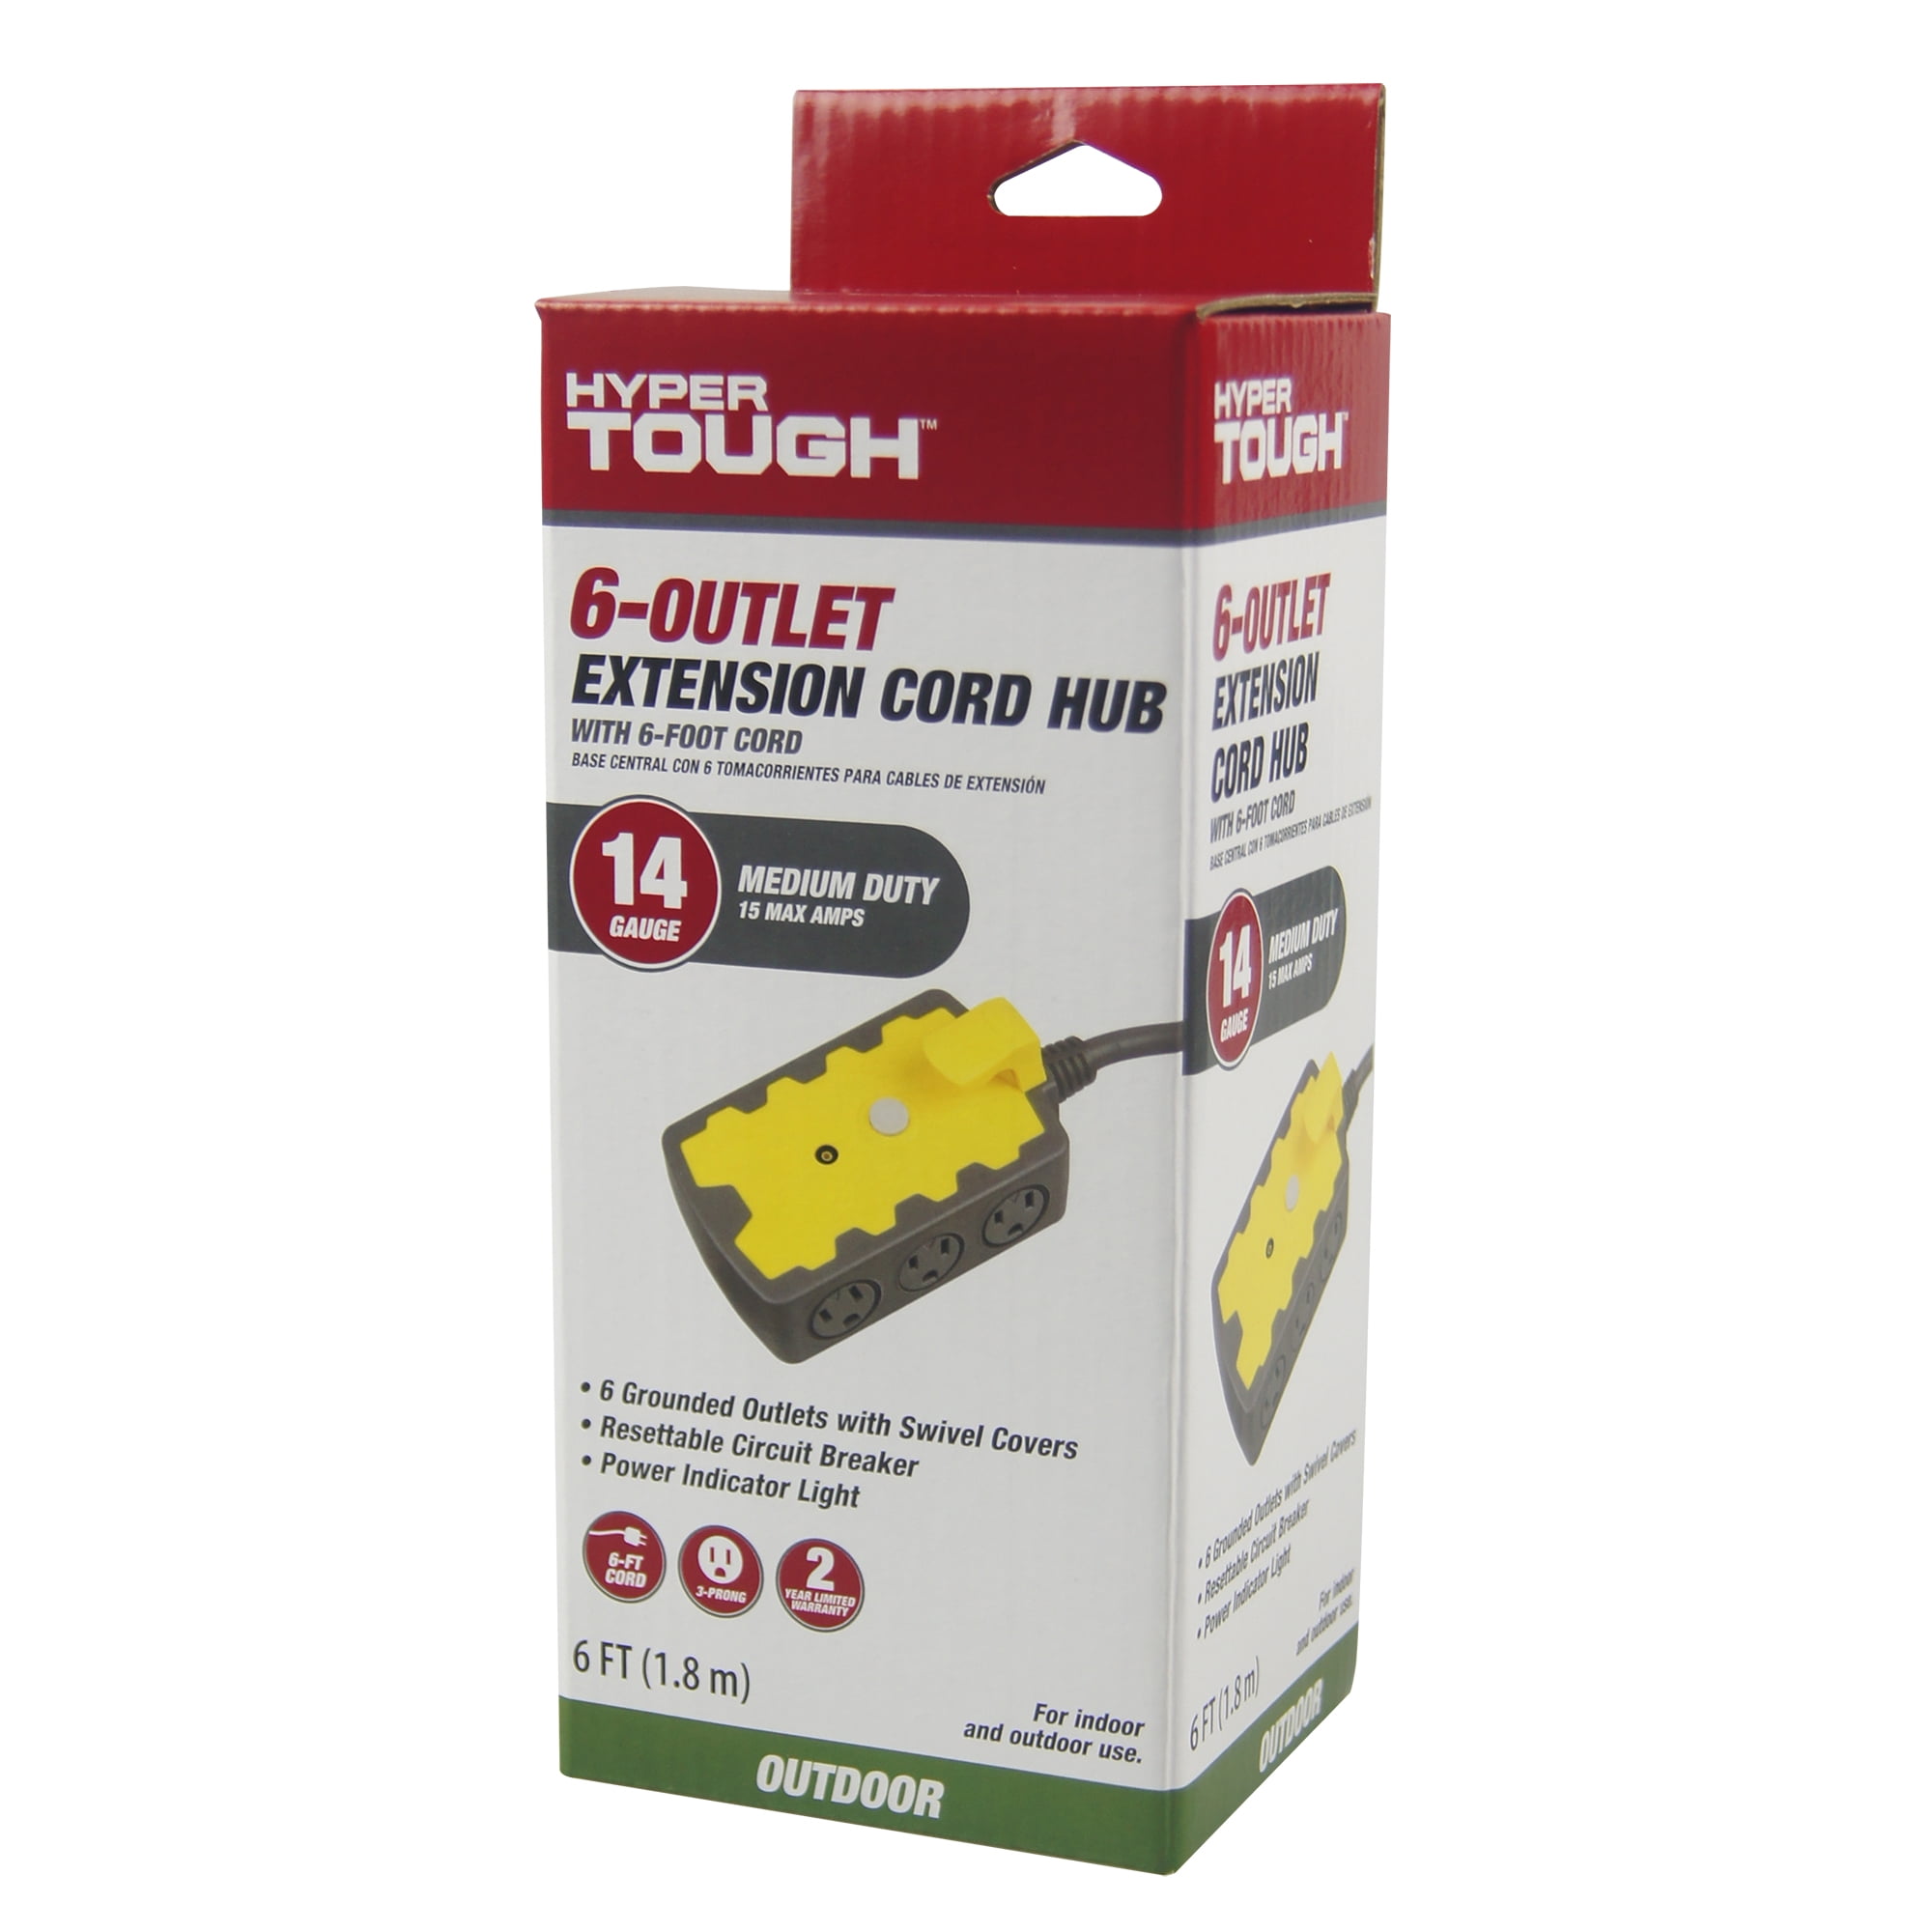 Hyper Tough Outdoor 6-Outlet 6ft Extension Cord Hub, Yellow/Gray